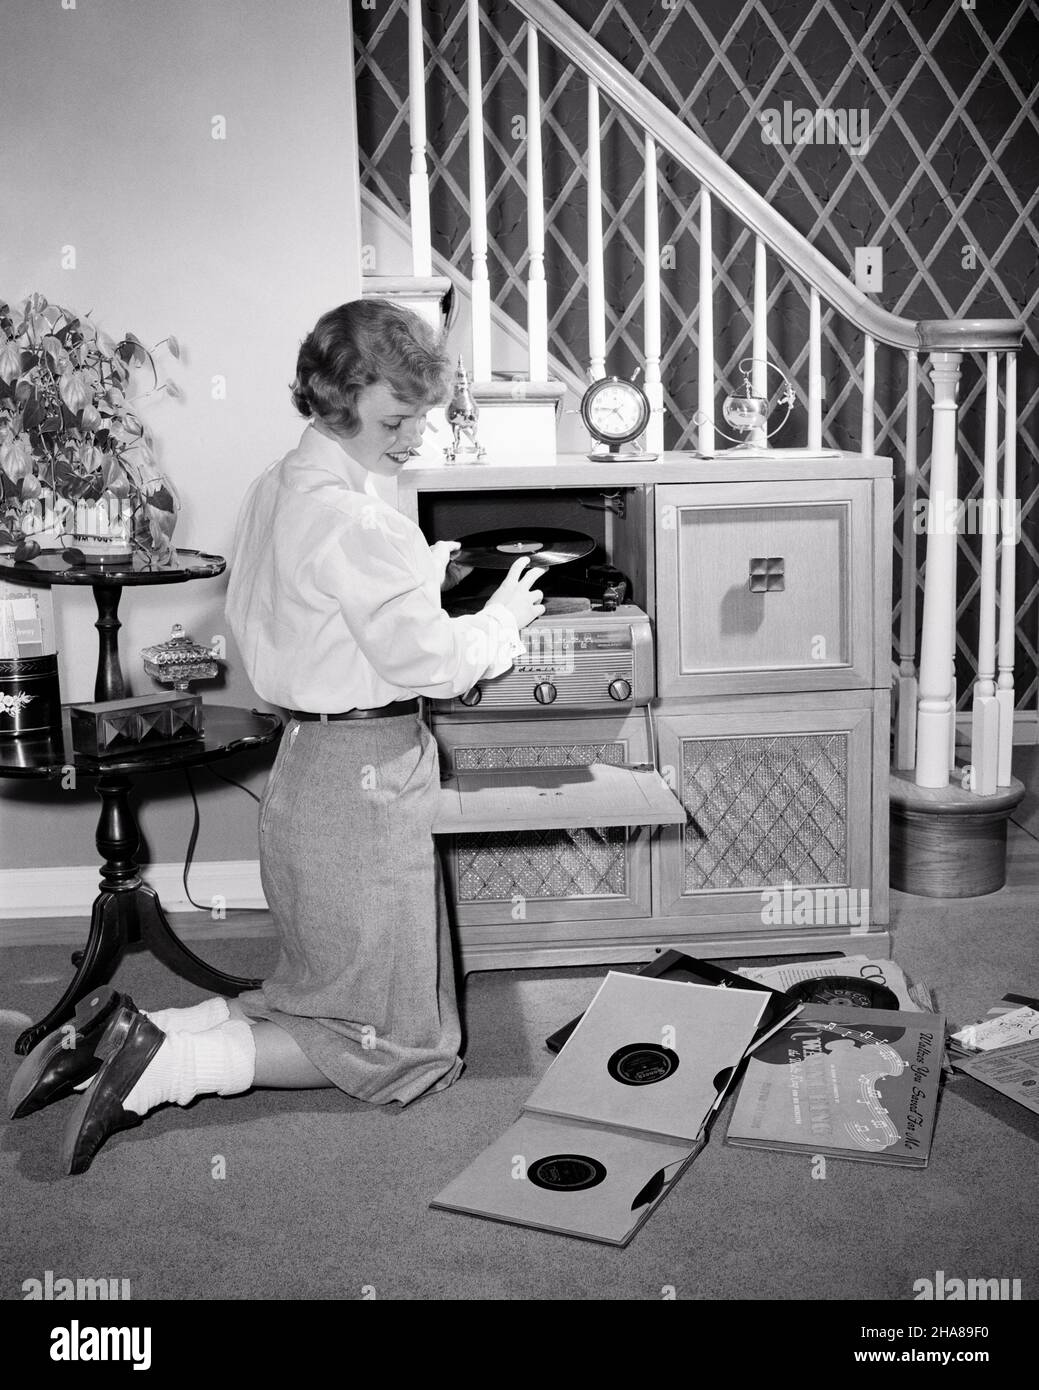 1950s TEENAGE GIRL WEARING SHIRT SKIRT BOBBY SOCKS LOAFERS KNEELING BY CONSOLE RADIO PHONOGRAPH PLAYING 78 RPM VINYL RECORDS - j5793 HAR001 HARS JUVENILE STYLE COMMUNICATION RECORDS VINYL JOY LIFESTYLE SOUND CELEBRATION FEMALES HOUSES HOME LIFE COPY SPACE FULL-LENGTH PERSONS INSPIRATION RESIDENTIAL TEENAGE GIRL BUILDINGS ENTERTAINMENT B&W PHONOGRAPH KNEELING CONSOLE HAPPINESS LEISURE CHOICE EXCITEMENT KNOWLEDGE RECREATION OPPORTUNITY HOMES 78 RPM CONCEPTUAL LOAFERS BOBBY RESIDENCE STYLISH TEENAGED WHITE BLOUSE JUVENILES RELAXATION WEARING  BLACK AND WHITE CAUCASIAN ETHNICITY HAR001 KNEEL Stock Photo